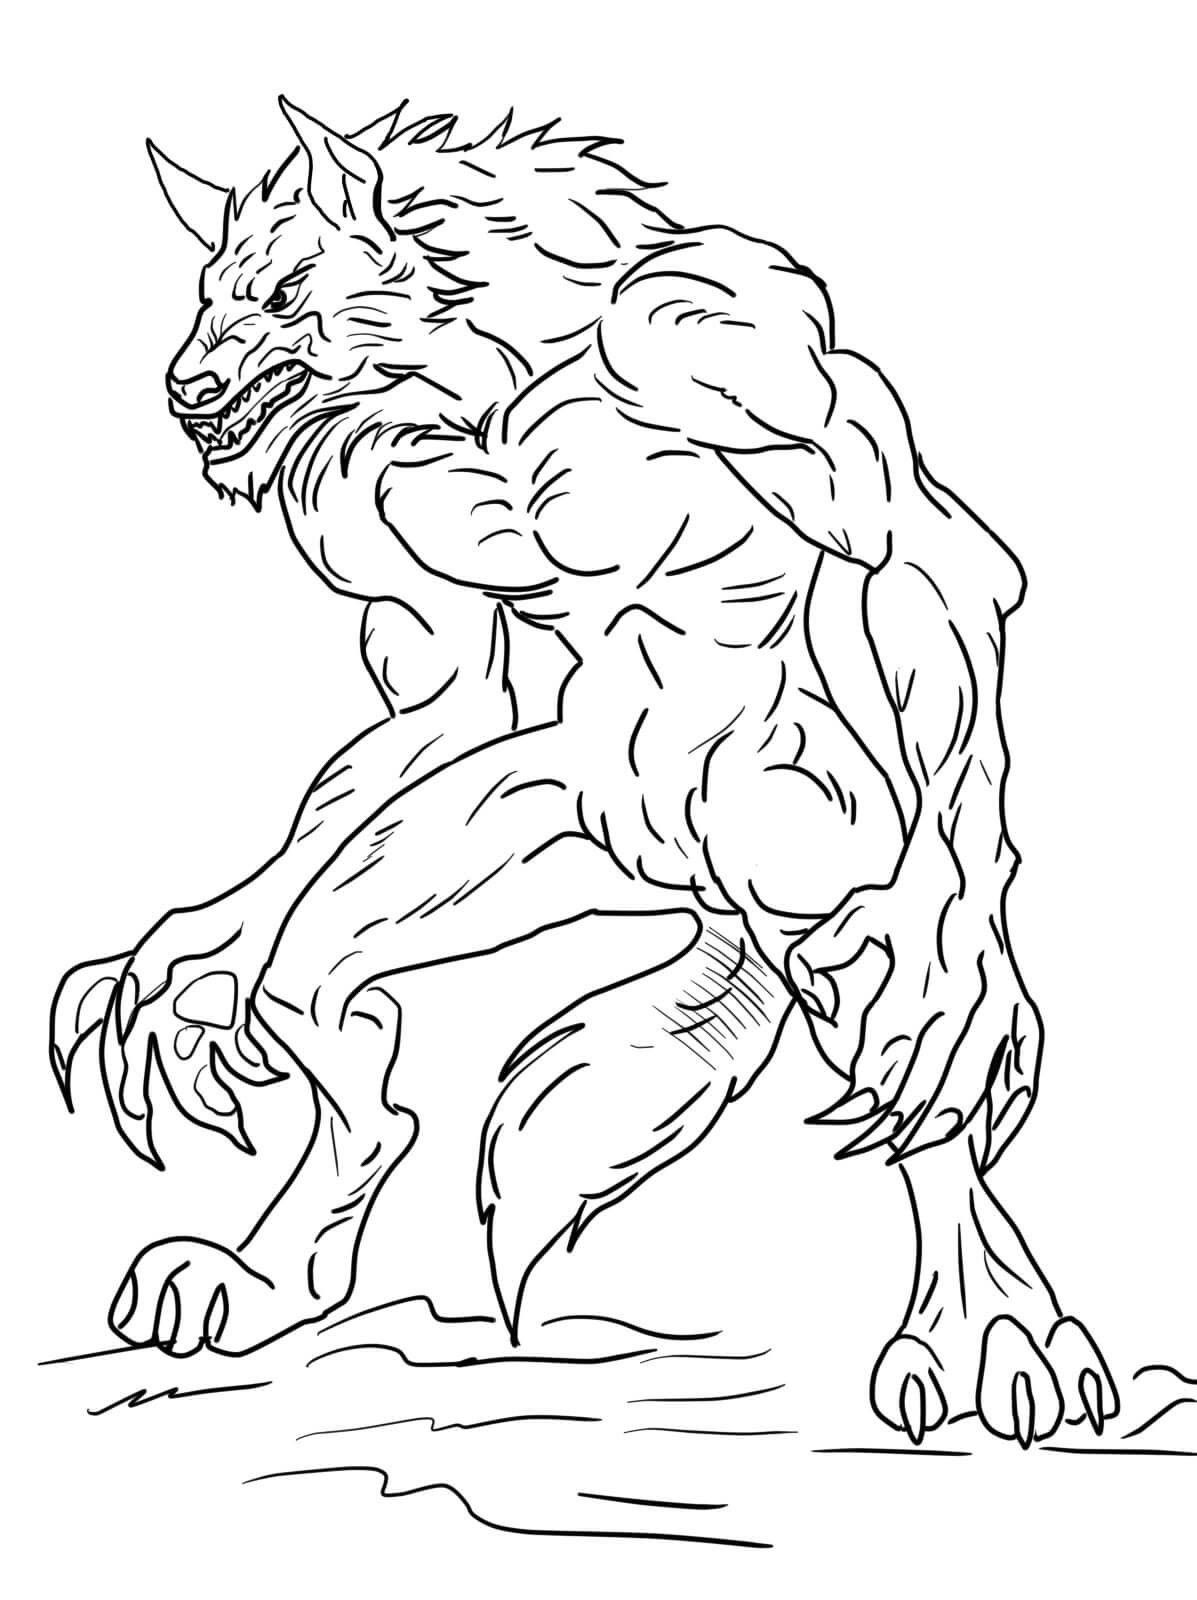 Werewolf Coloring Pages Best Coloring Pages For Kids